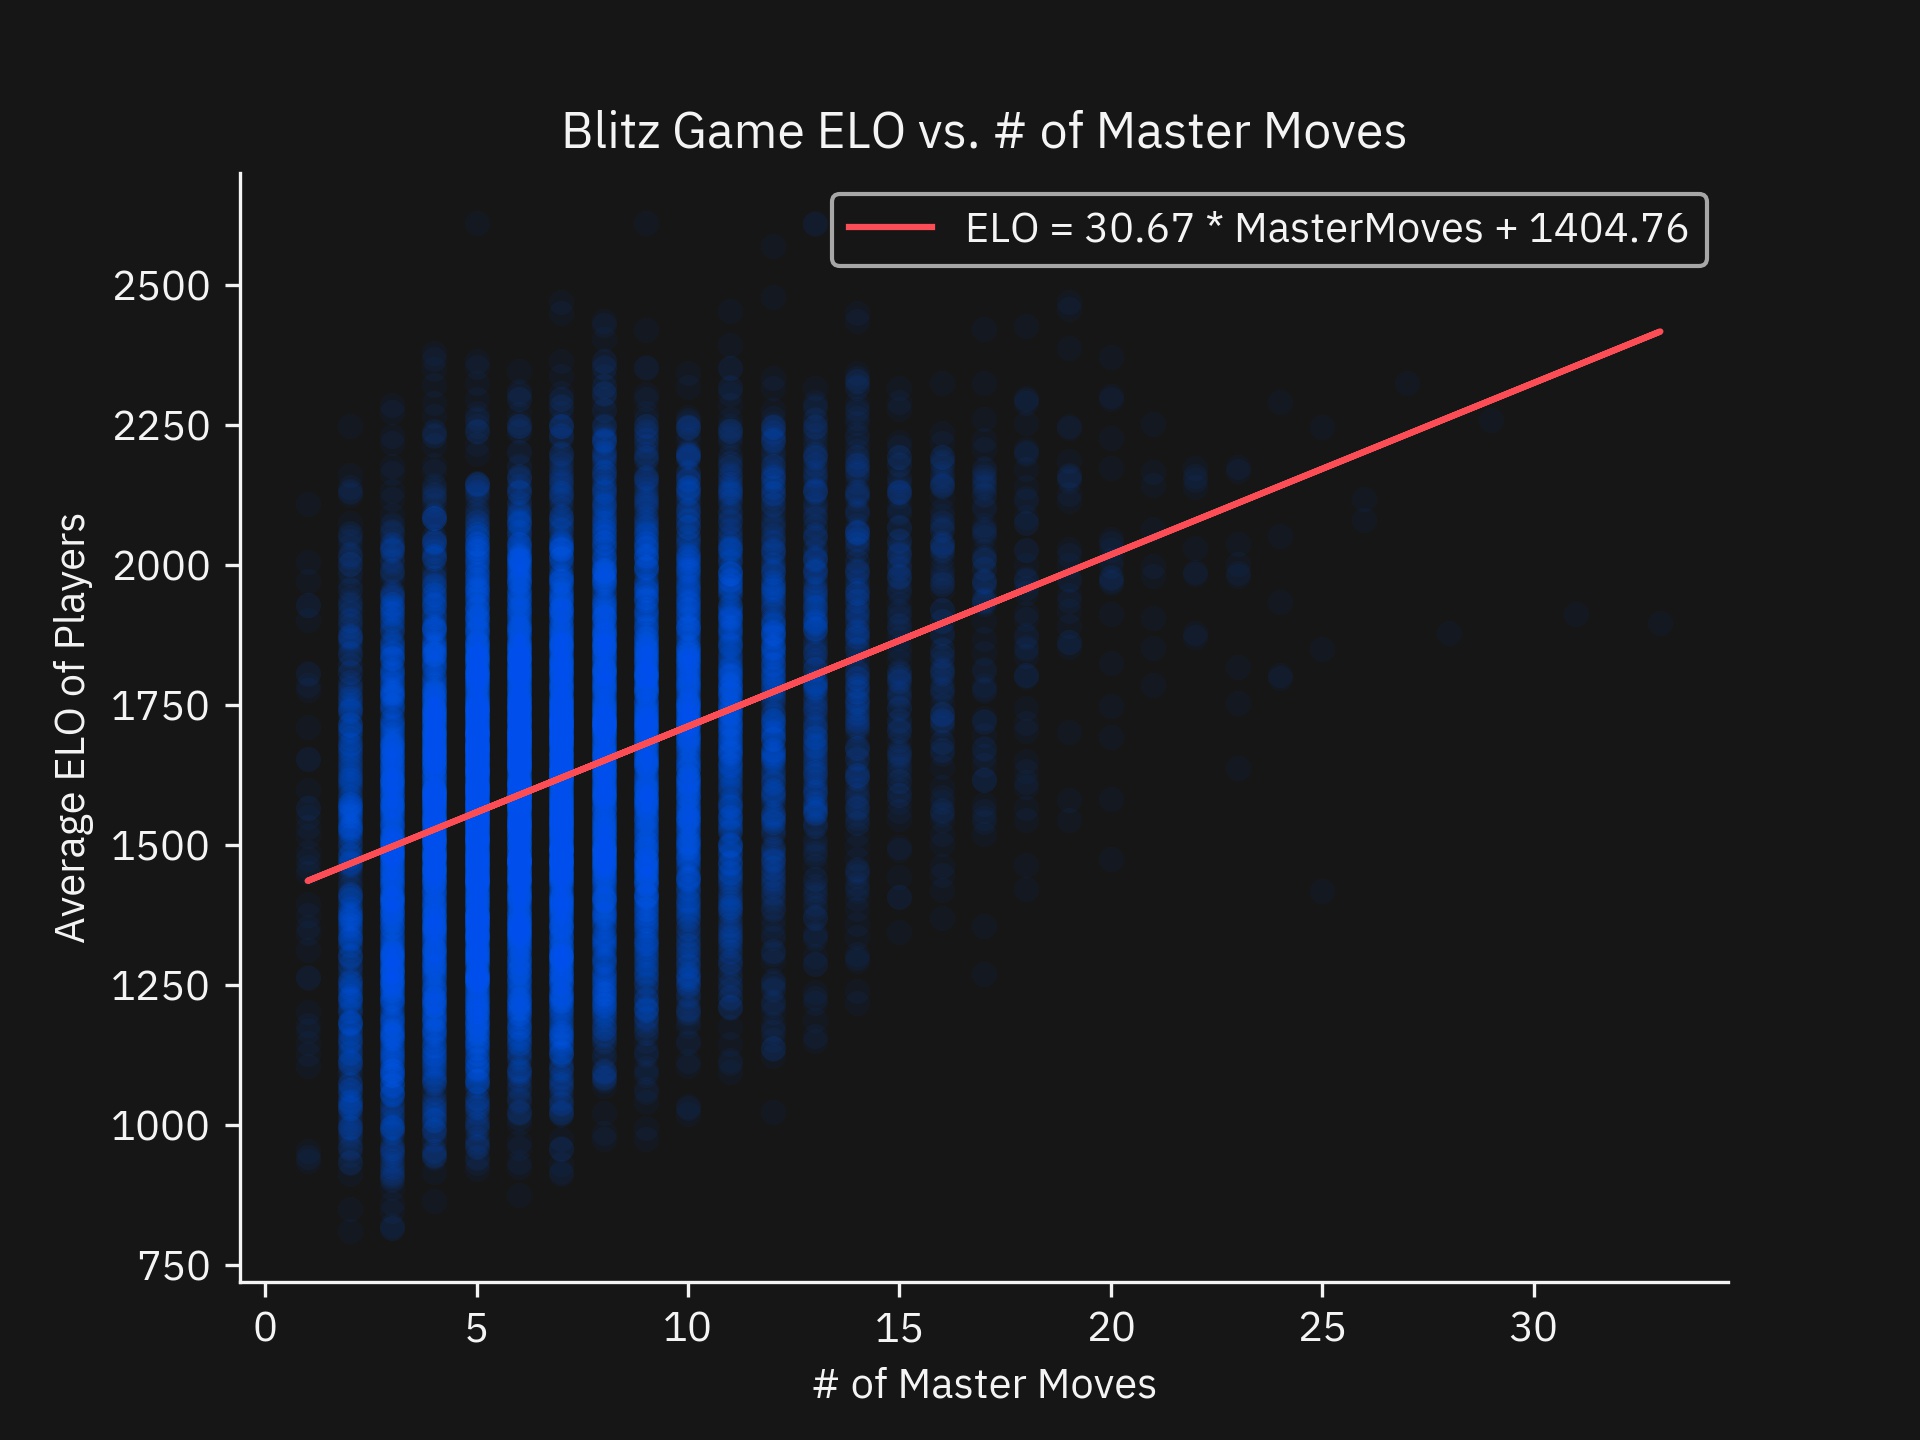 Scatter plot of Average Player ELO vs number of Master moves featured for Blitz games